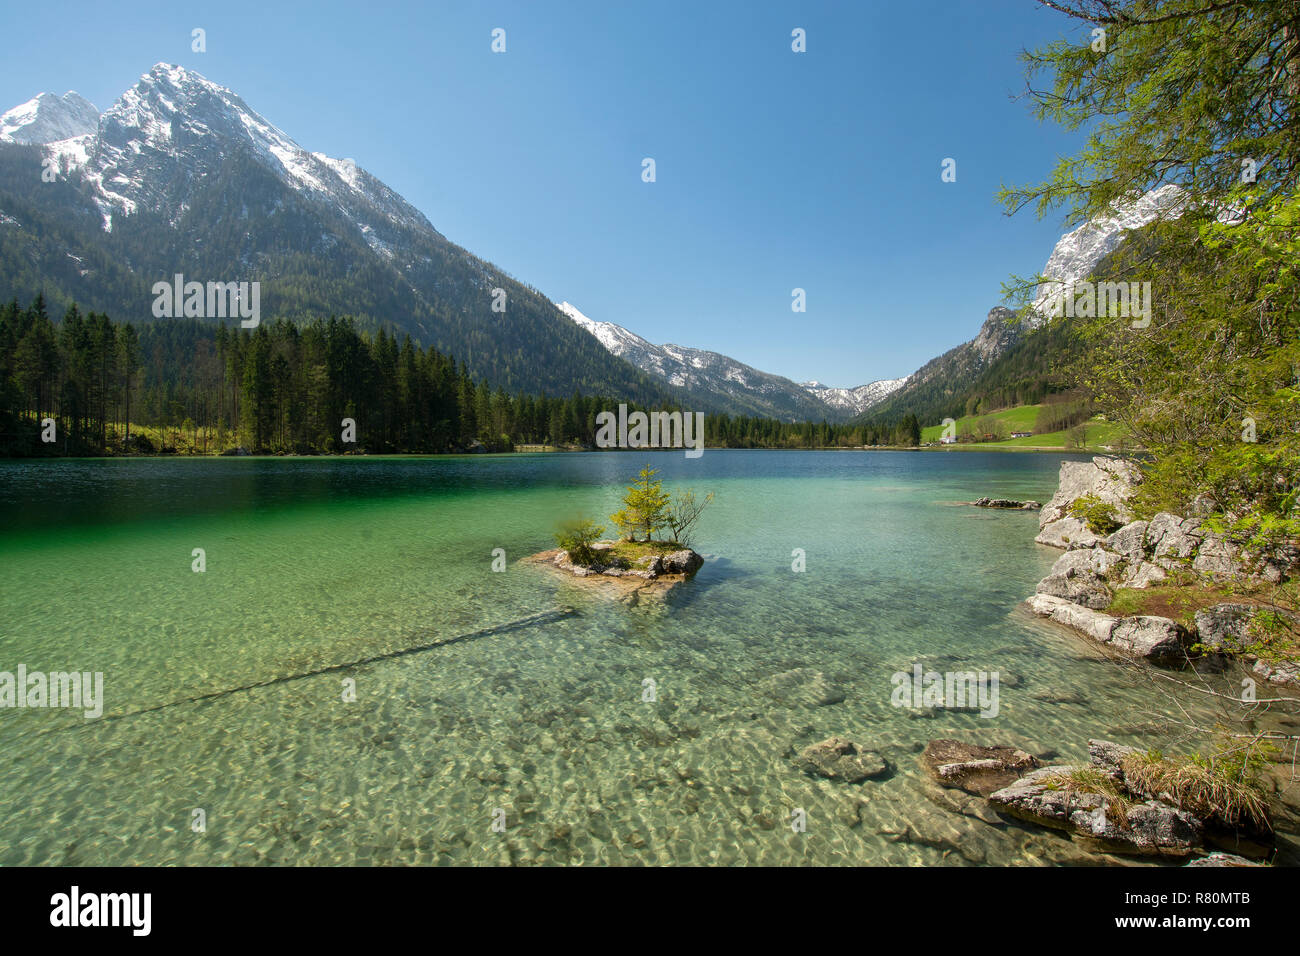 The lake Hintersee with the mountain Hochkalter in background. Berchtesgadener Land, Upper Bavaria, Germany Stock Photo